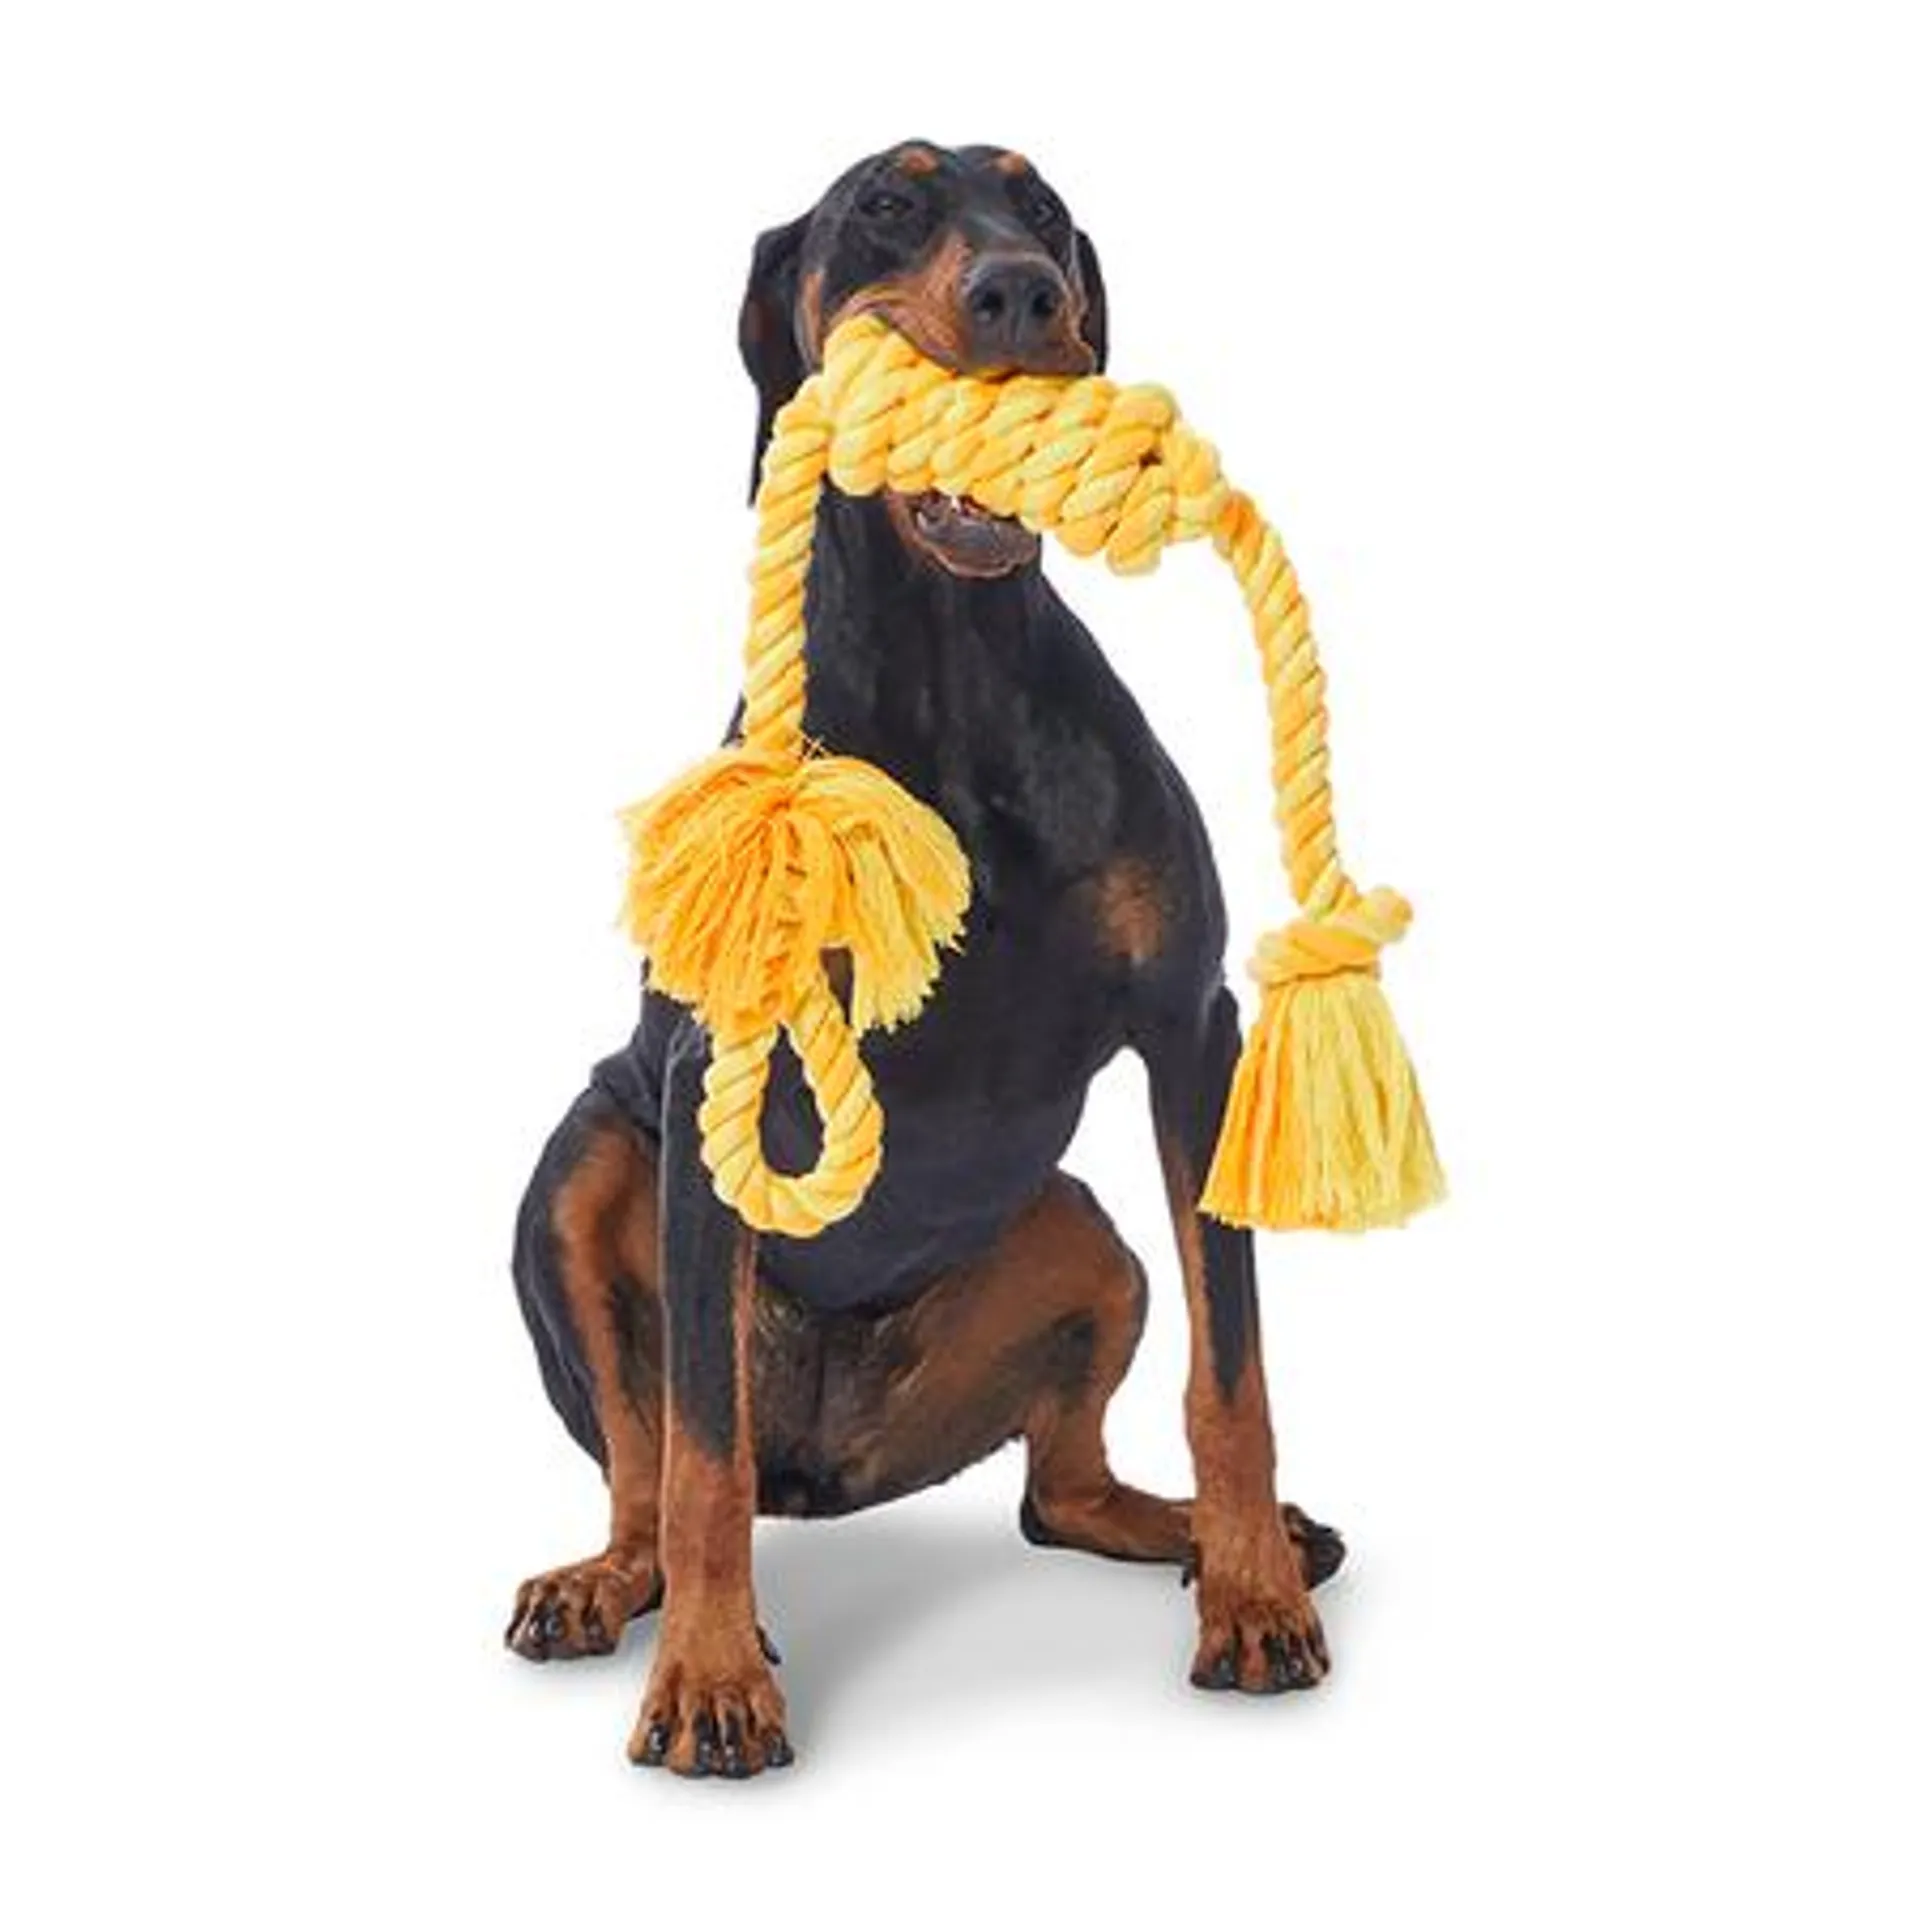 All Day Twisted Rope Tug With Handle Dog Toy Orange 83cm